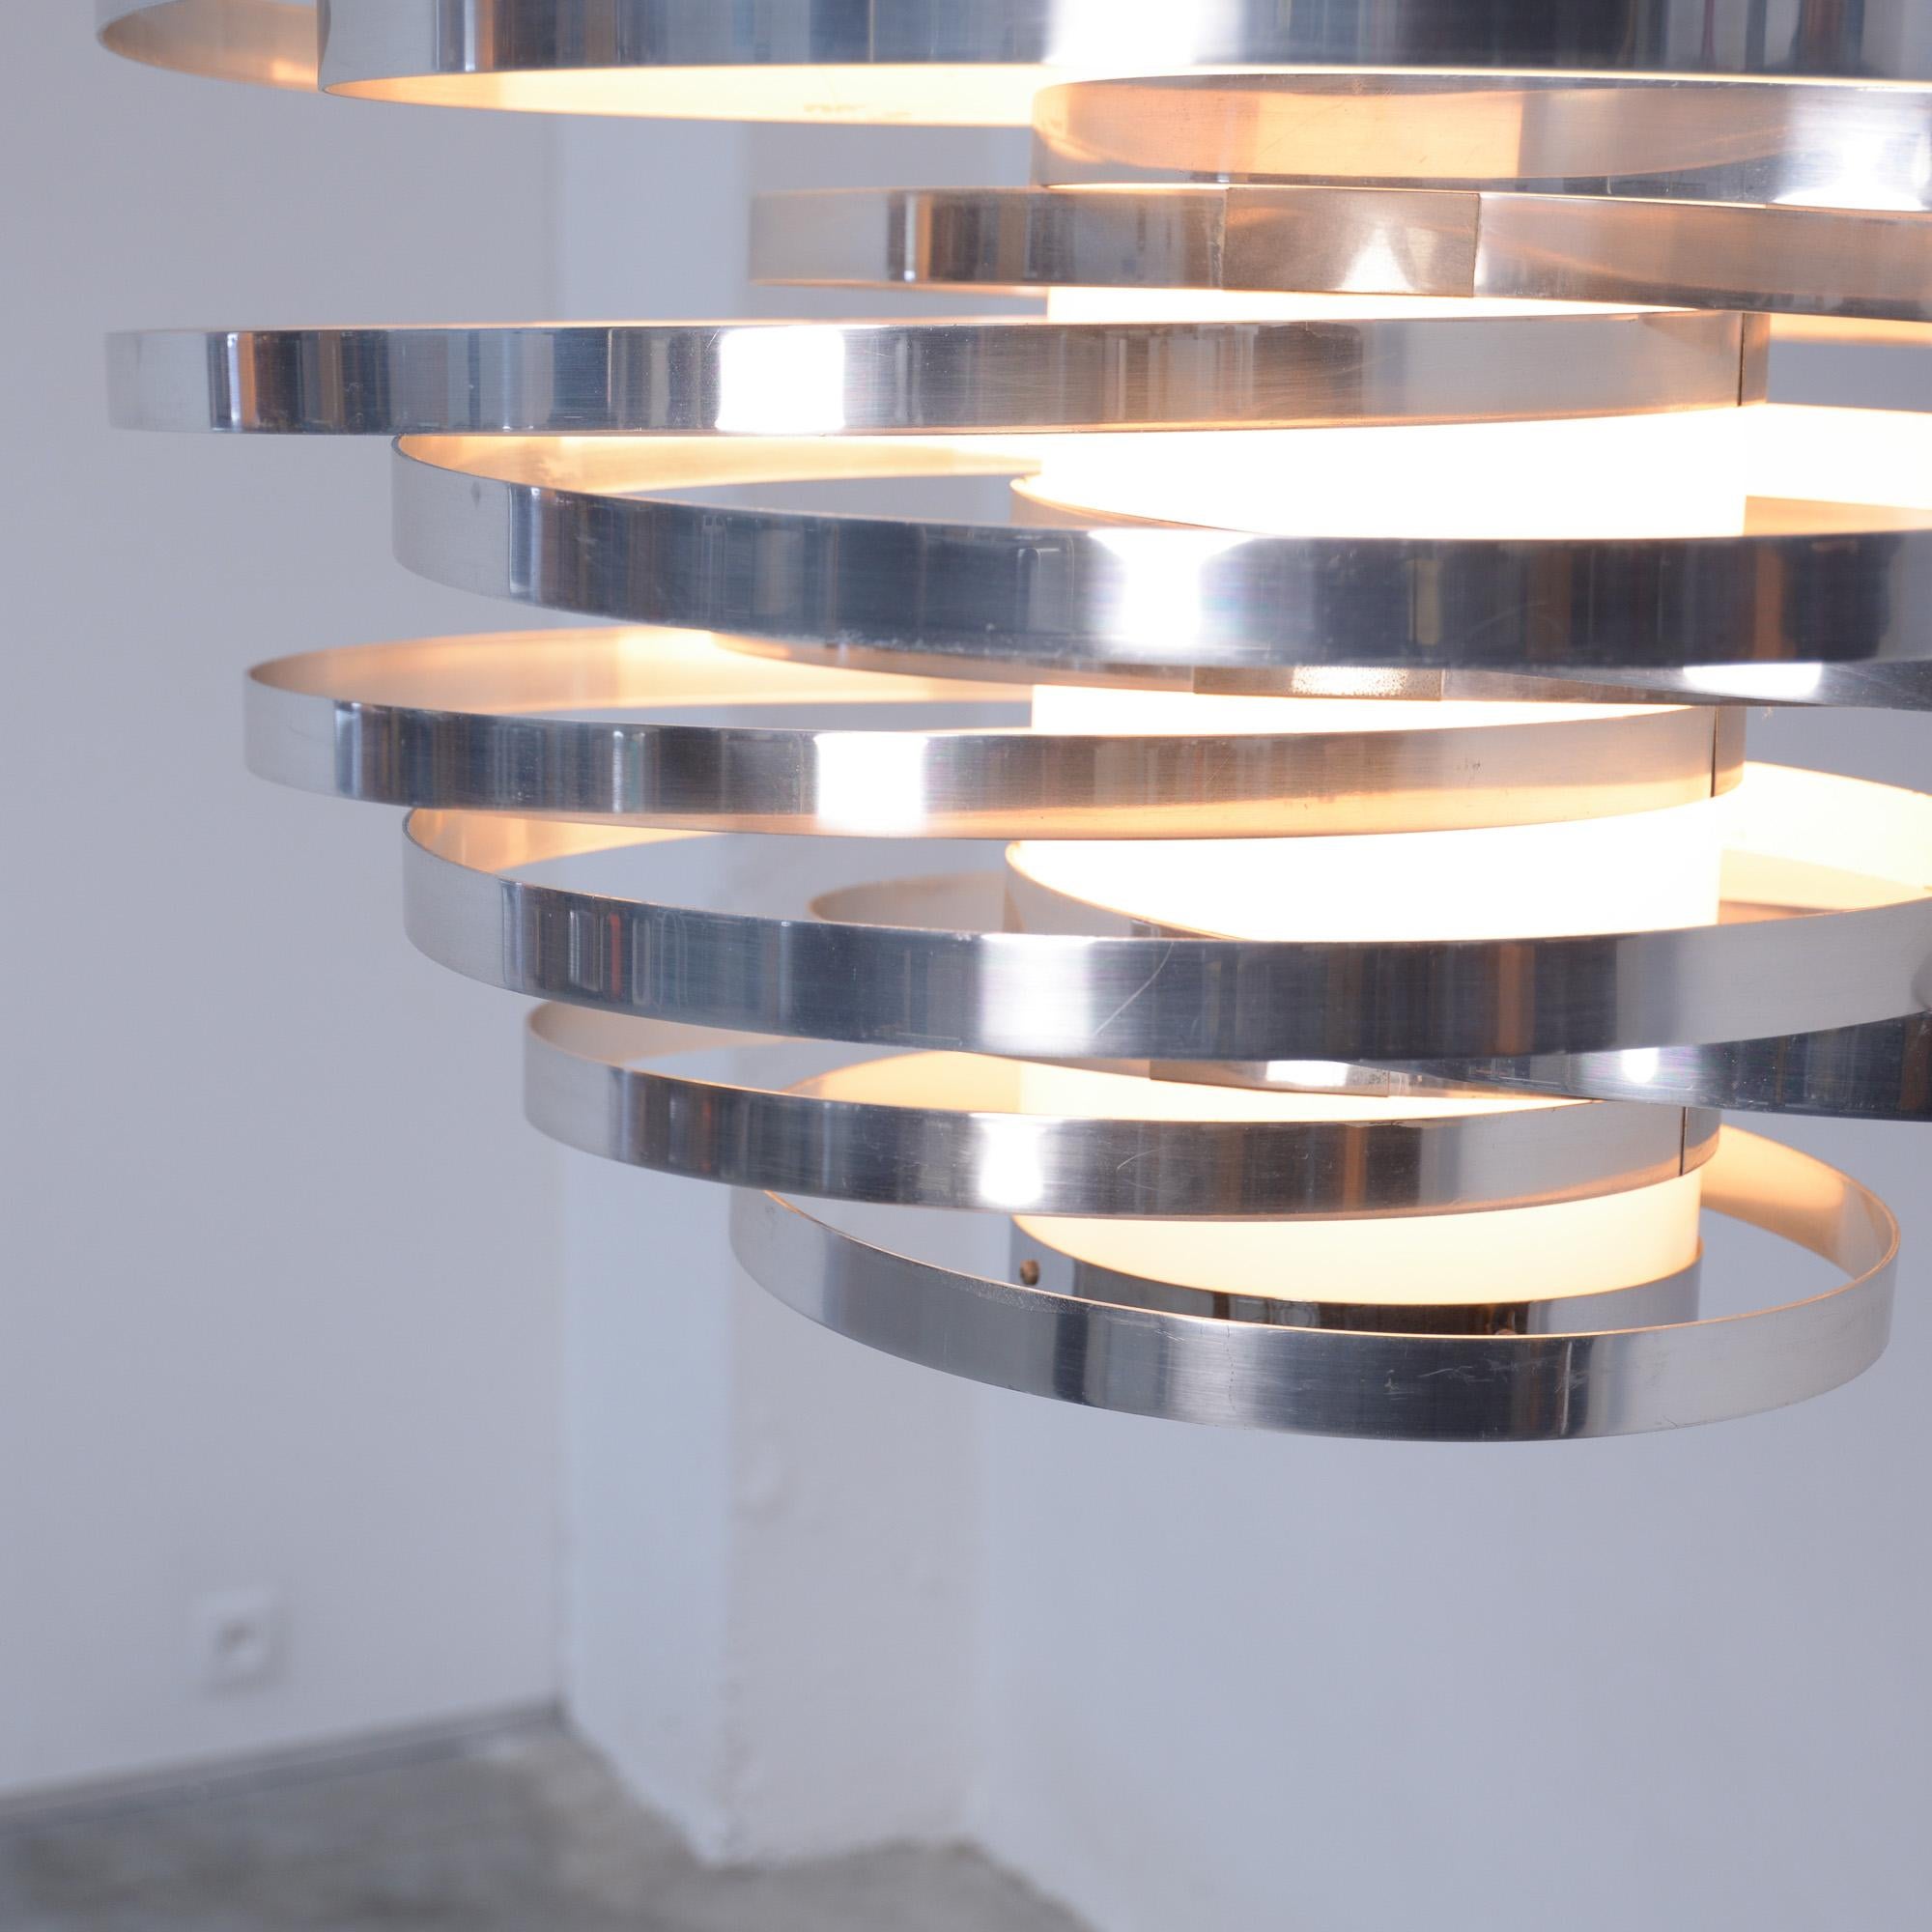 This magical cyclone chandelier was designed by Gaetano Sciolari in Italy in the late 1960s.
This dynamic design is made of a white Plexiglas central cylinder surrounded by aluminium rings.
This chandelier is in very good condition, with normal